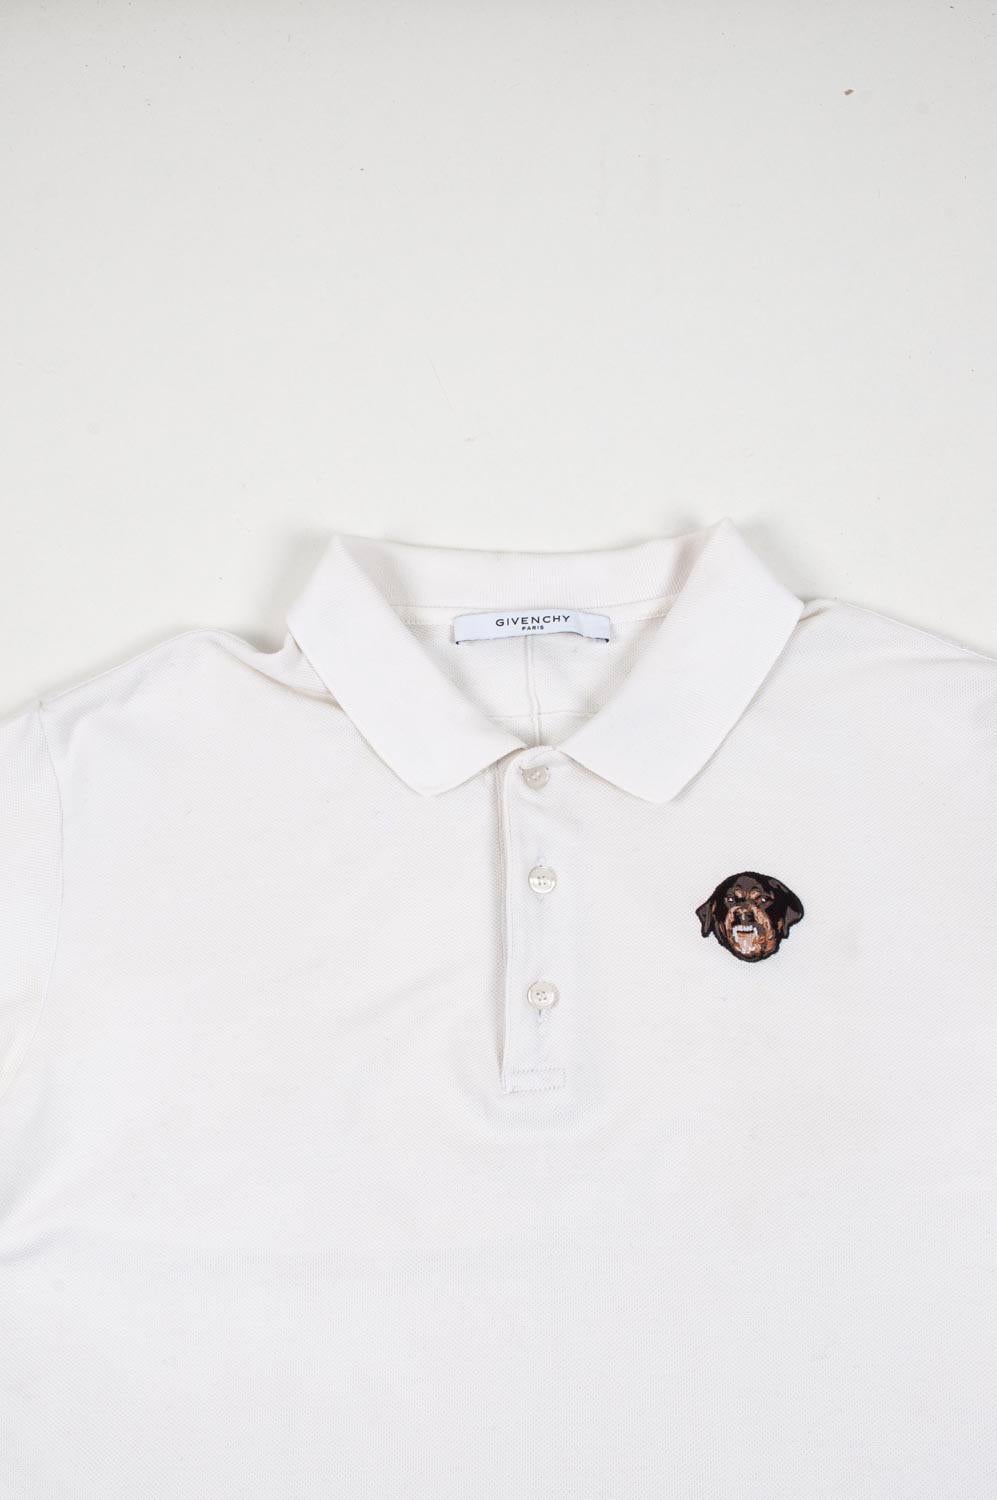 Item for sale is 100% genuine Givenchy Polo Shirt Men, S300
Color: White
(An actual color may a bit vary due to individual computer screen interpretation)
Material: 100% cotton
Tag size: XL
This t shirt is great quality item. Rate 8.5 of 10, very